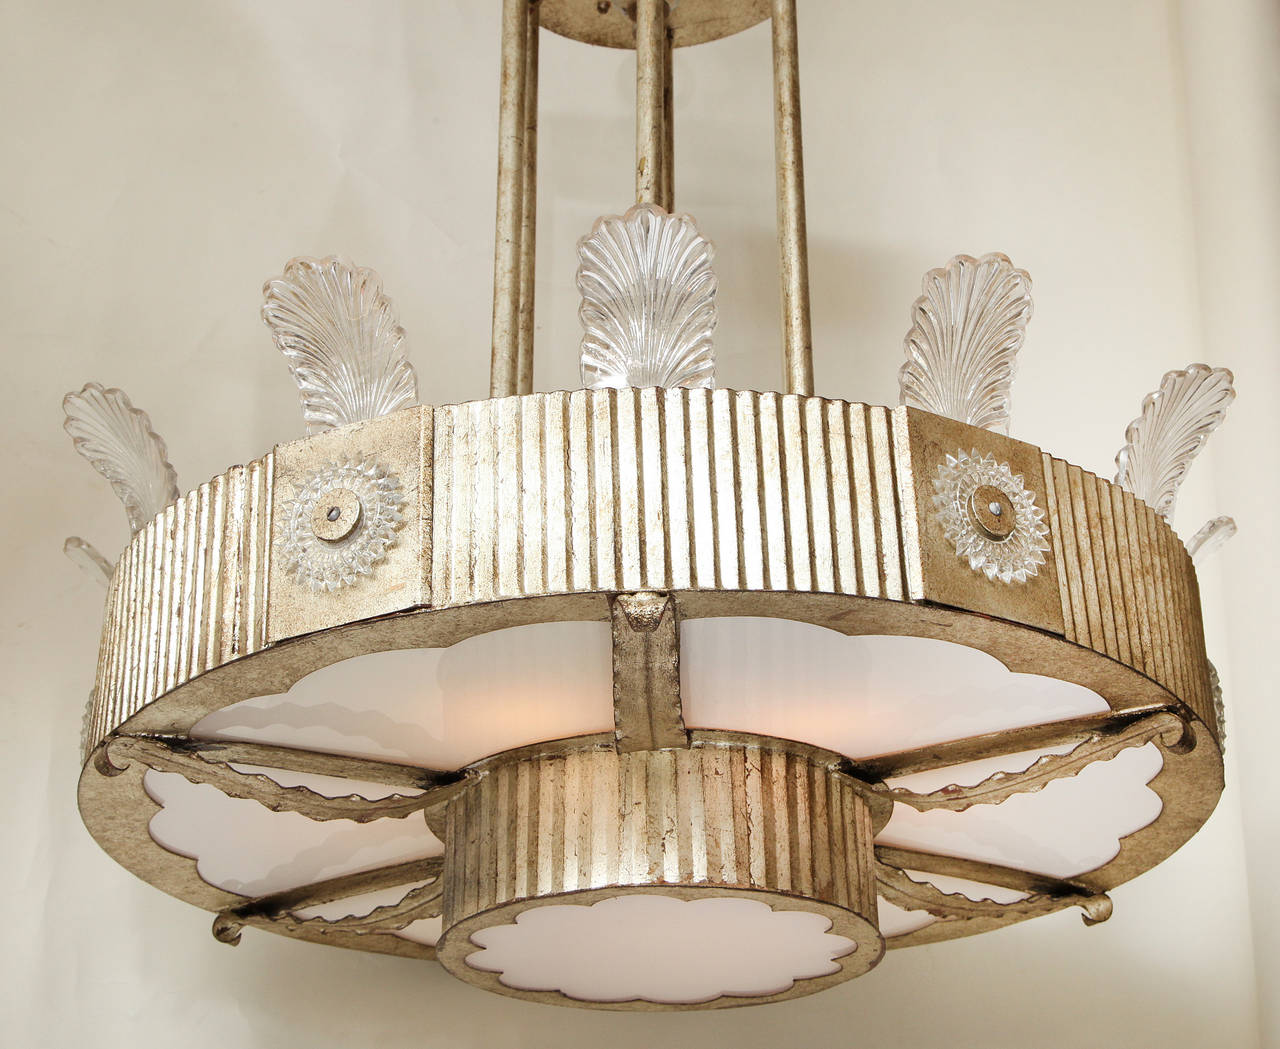 An Art Deco inspired round two-tiered ceiling light, the round metal frames with ridged texture having four square panels decorated with cut glass sunburst ornaments over the 24 karat white gold finished frame, the upper tier and lower tier of